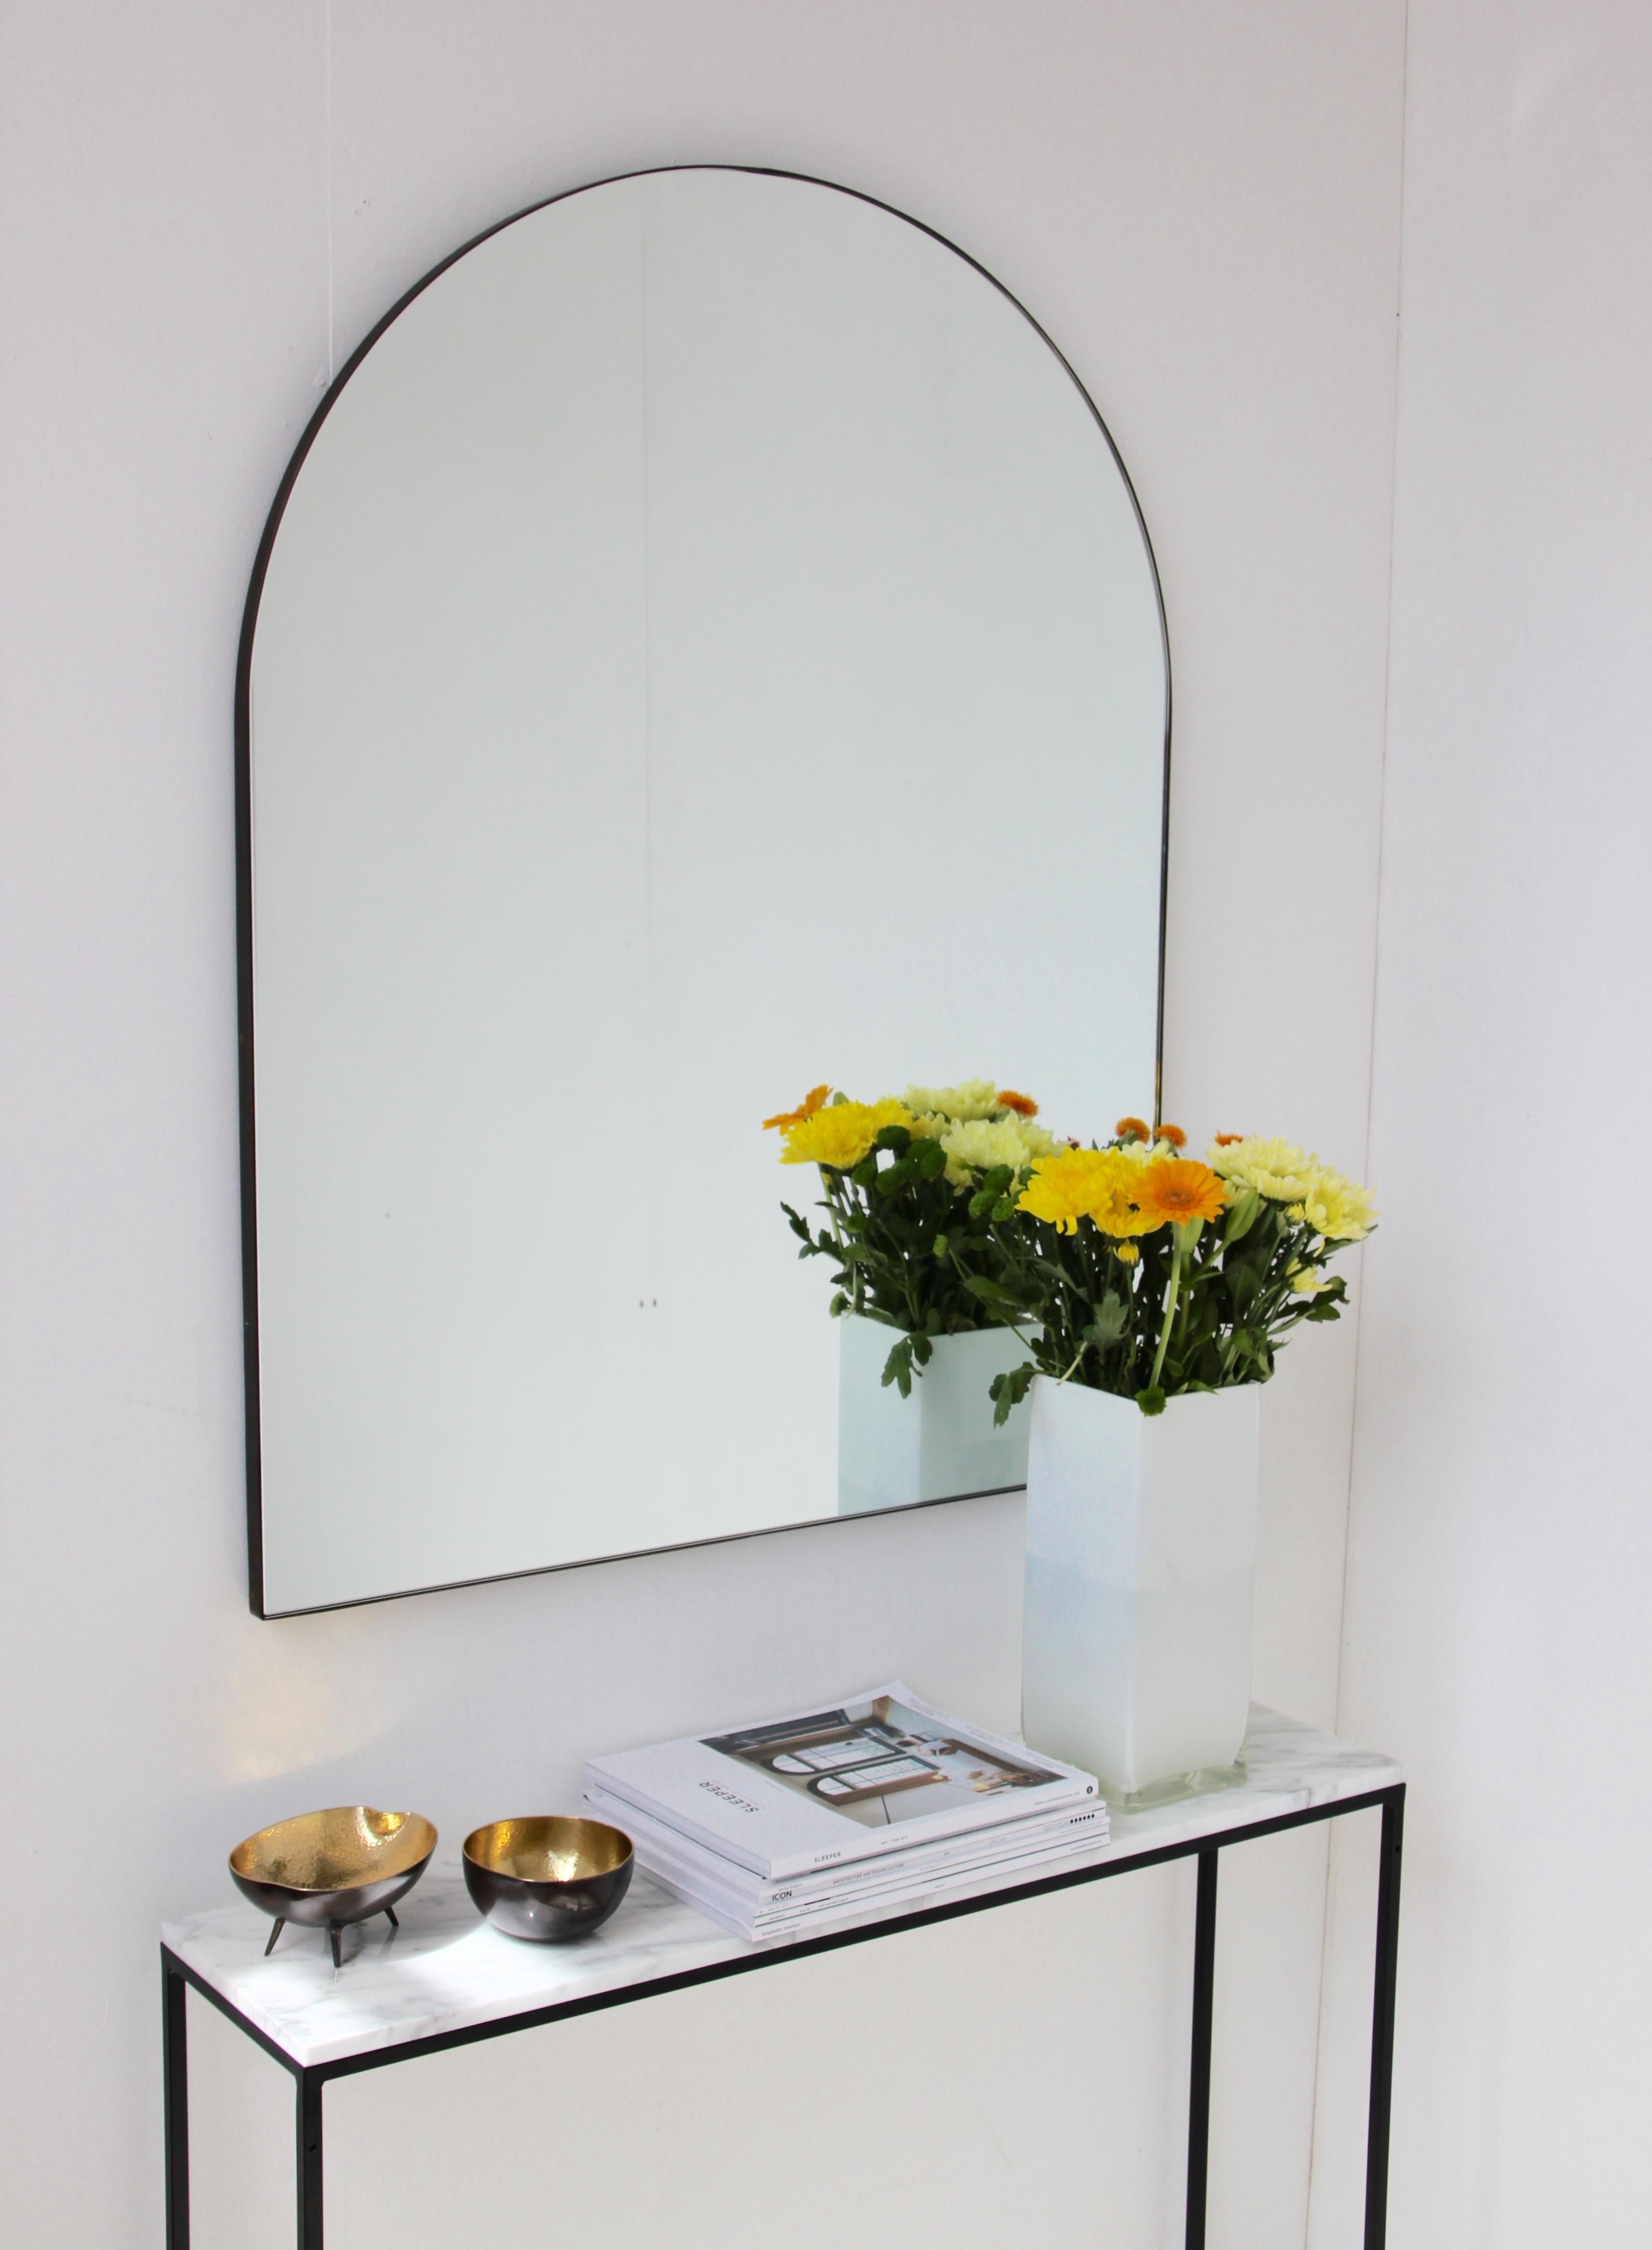 Delightful contemporary arched mirror with a brass patina frame. Designed and handcrafted in London, UK.

Dimensions: W 75 x H 95 x D 1.8cm / w 29.5'' x h 37.4'' x d 0.7'', or any bespoke size.

Medium, large and extra-large (37cm x 56cm, 46cm x